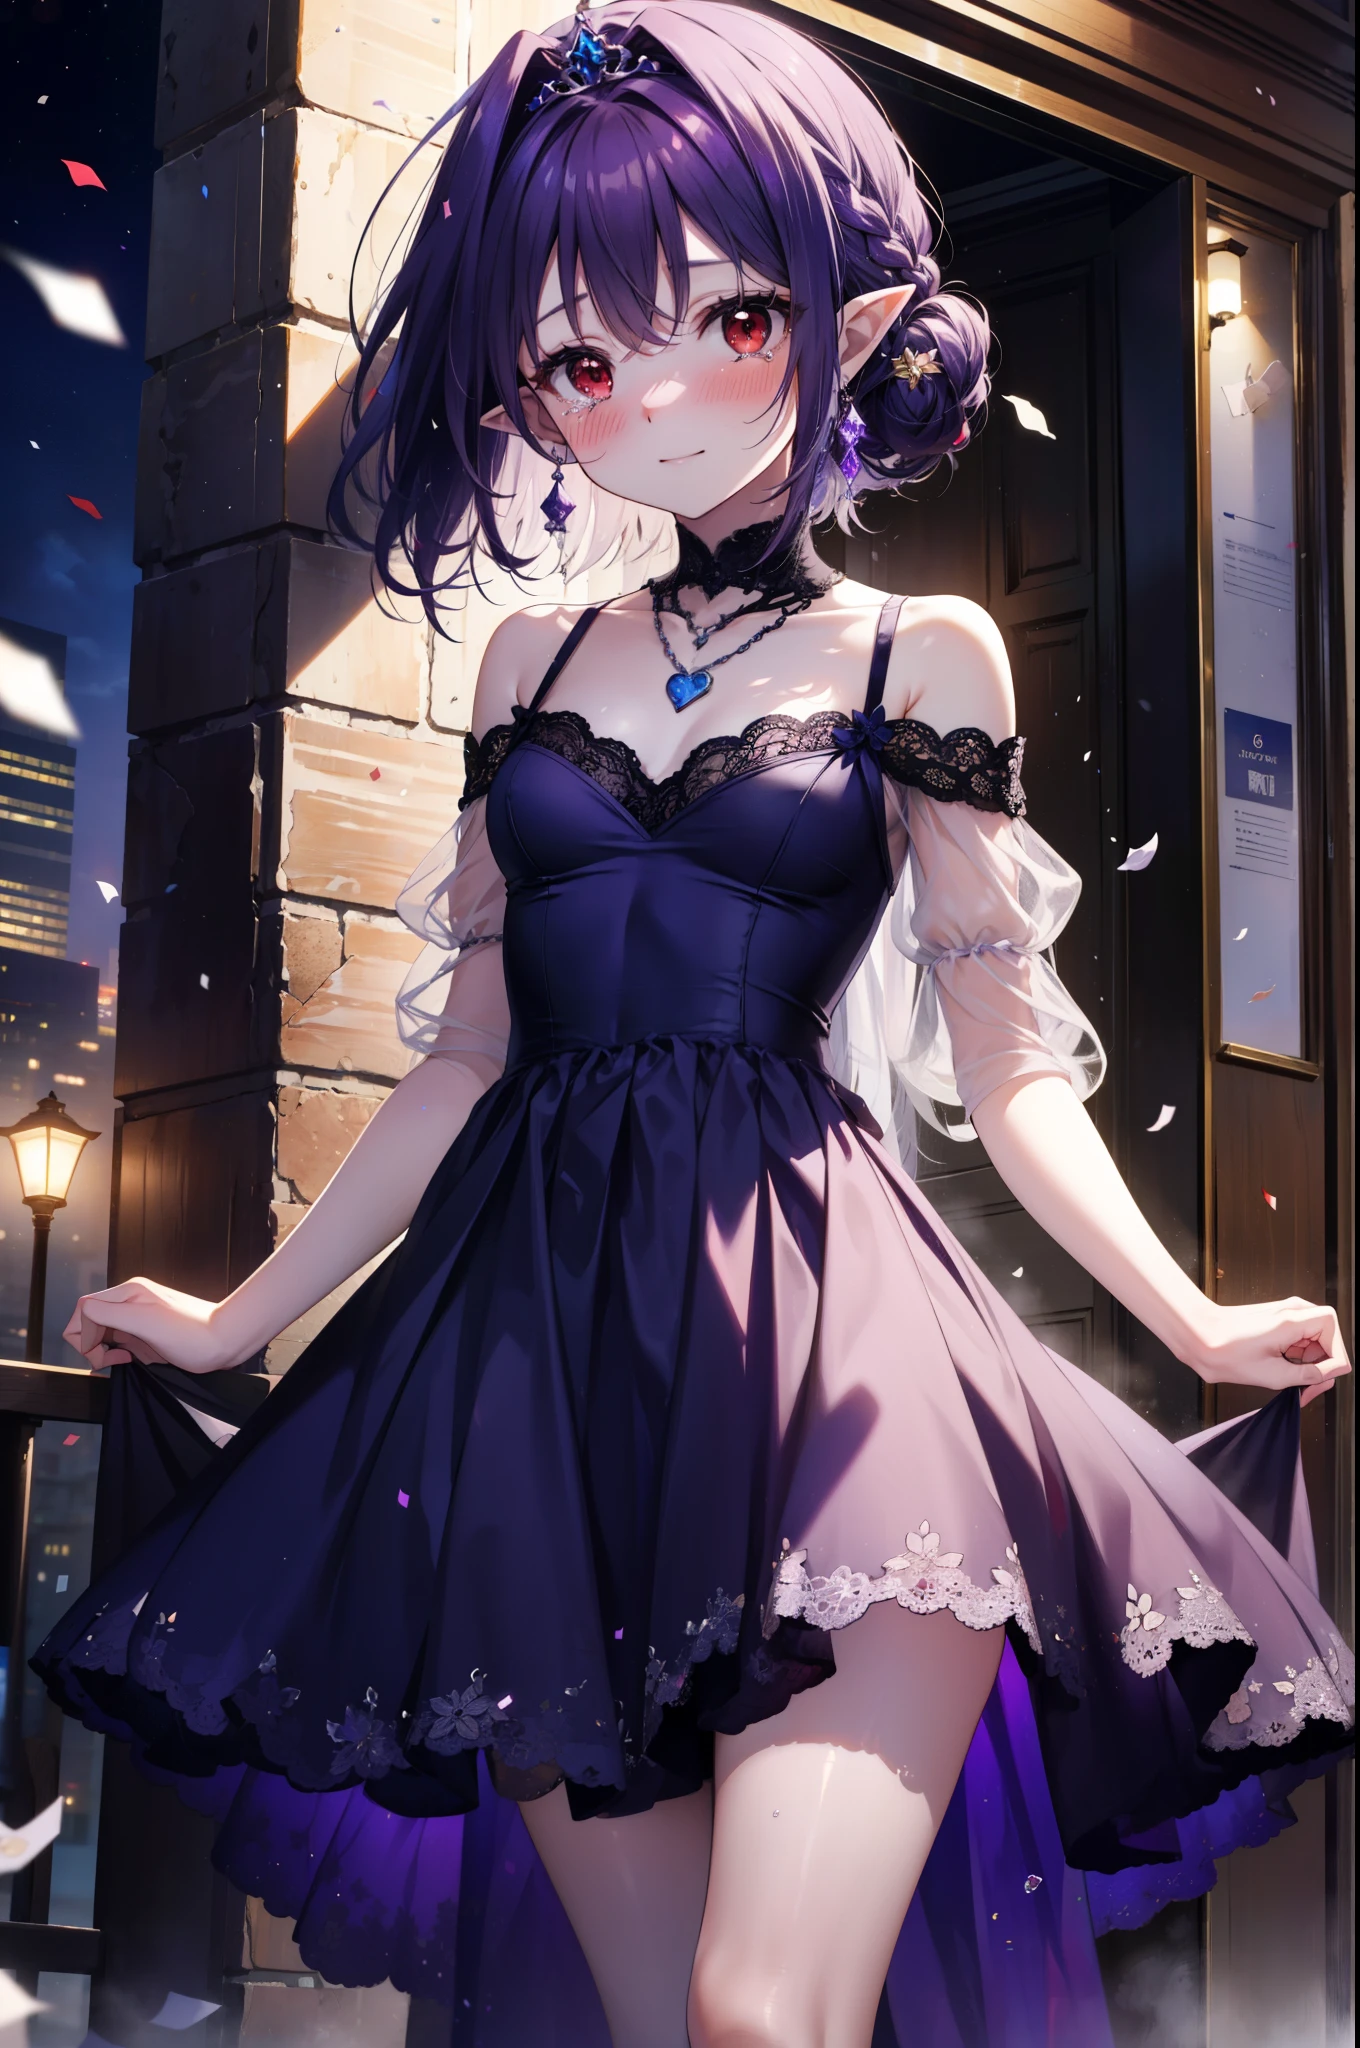 yuukikonno, Yuki Konno,Long Hair, tiara,Pointy Ears, Purple Hair, (Red eyes:1.5), (Small breasts:1.2), smile,Purple Dress,Purple long skirt,purple stiletto heels,No sleeve,Expose your shoulders,Bare arms,Bare neck,bare clavicle,Purple Hair is wearing a wedding ring on her left hand., was presented before him,Heart Necklace,Tears stream down her face,Tears of joy,I cry a lot,Confetti,Romantic night view,moonlight,
BREAK outdoors, hill,
BREAK looking at viewer, (Cowboy Shot:1.5),
BREAK (masterpiece:1.2), highest quality, High resolution, unity 8k wallpaper, (shape:0.8), (Beautiful details:1.6), Highly detailed face, Perfect lighting, Highly detailed CG, (Perfect hands, Perfect Anatomy),